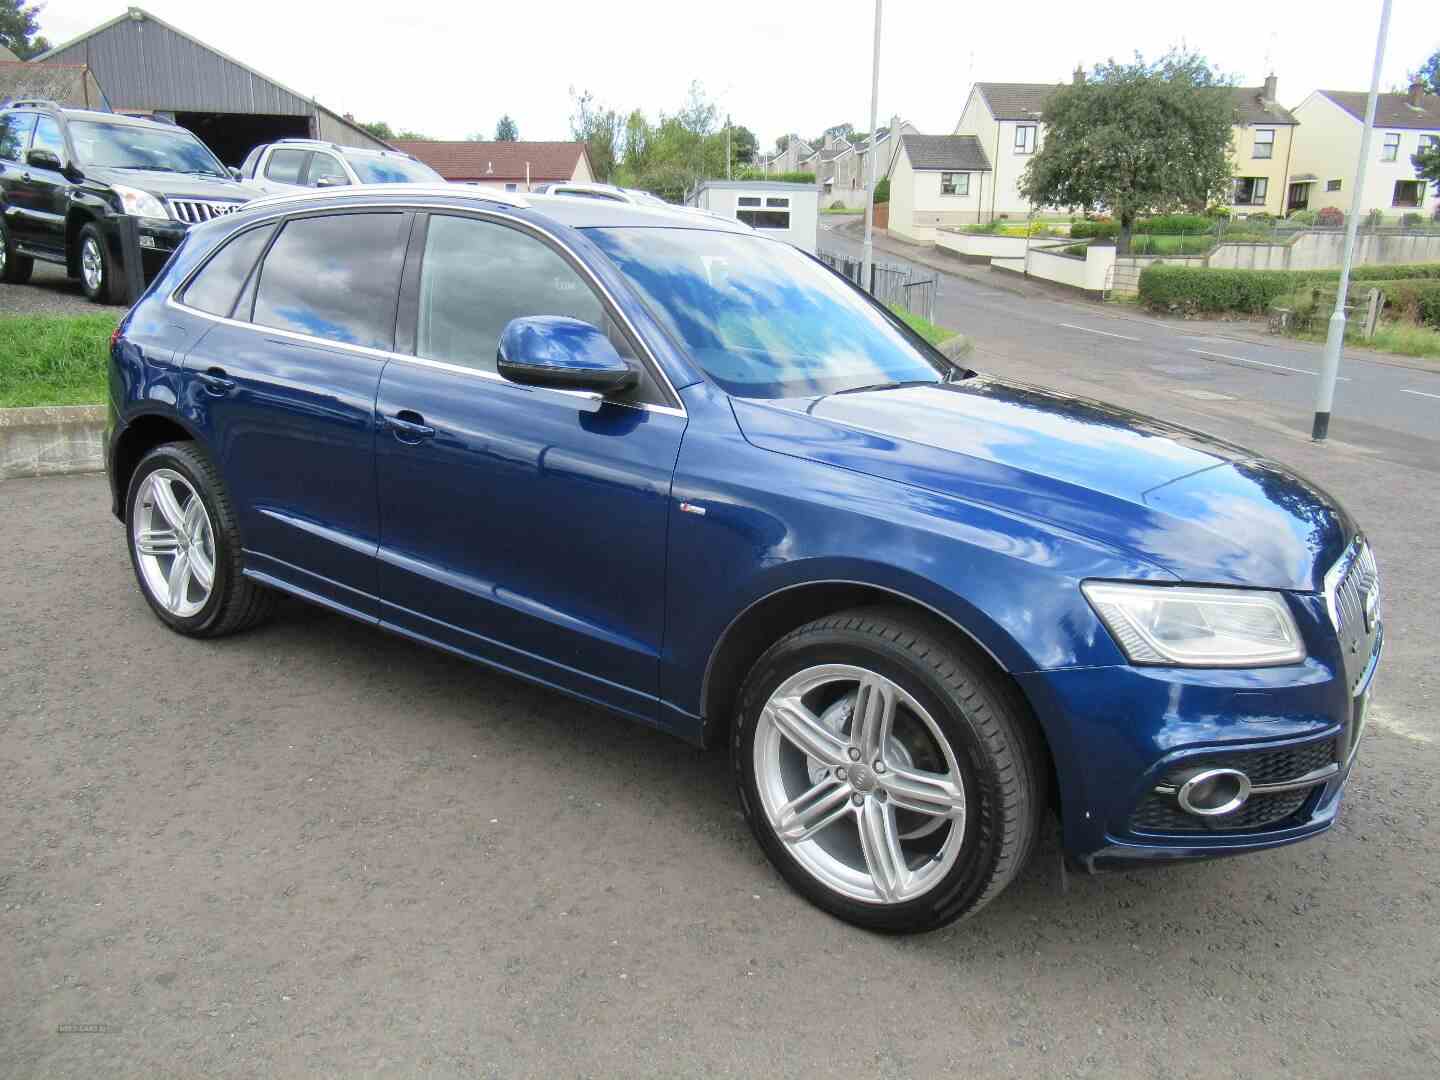 Audi, Q5, 2013, 2.0 TDI Quattro S Line Plus 5dr. One owner, fully serviced, Timing Belt changed